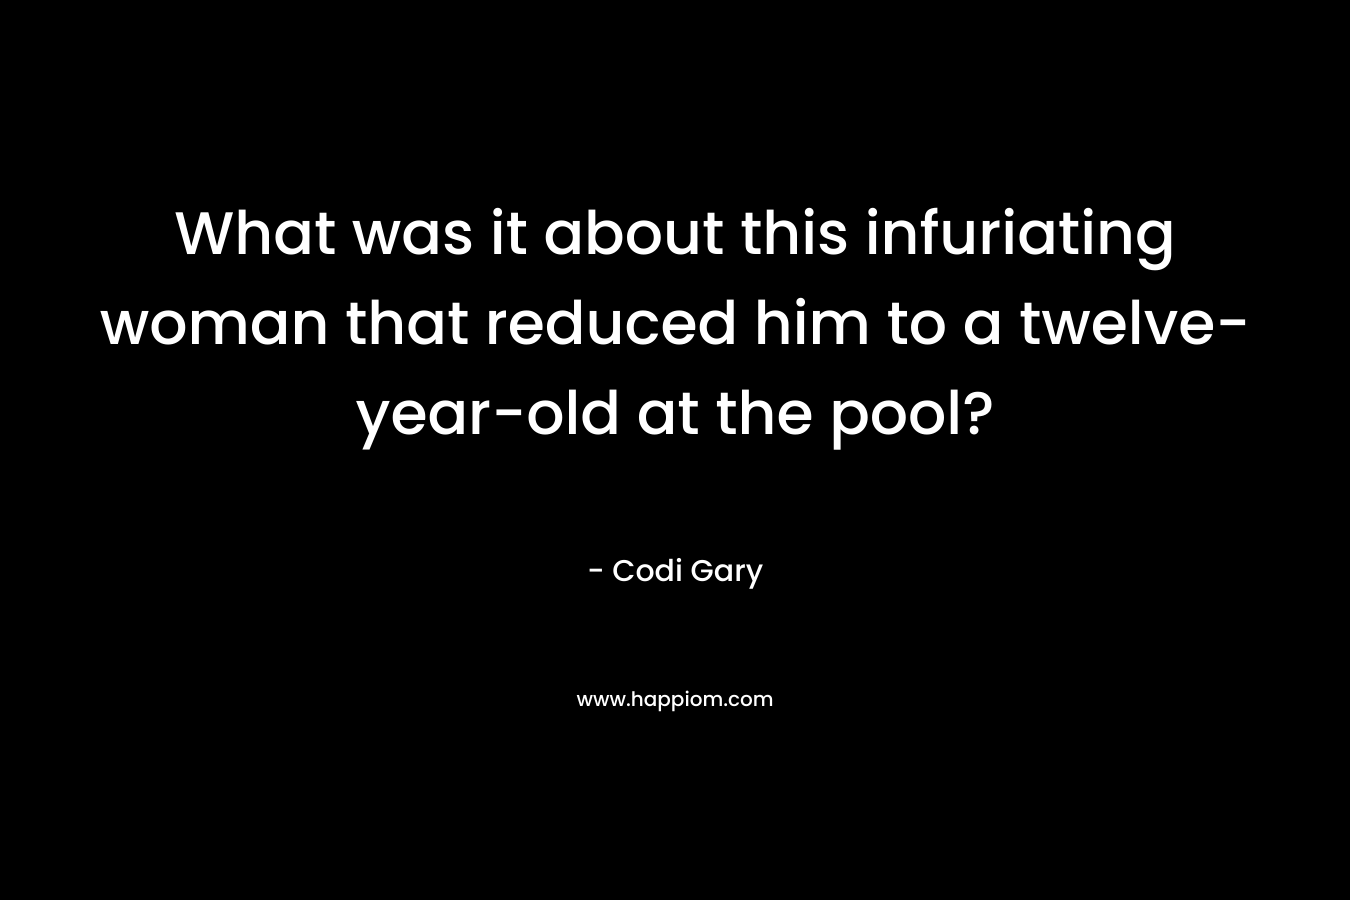 What was it about this infuriating woman that reduced him to a twelve-year-old at the pool? – Codi Gary